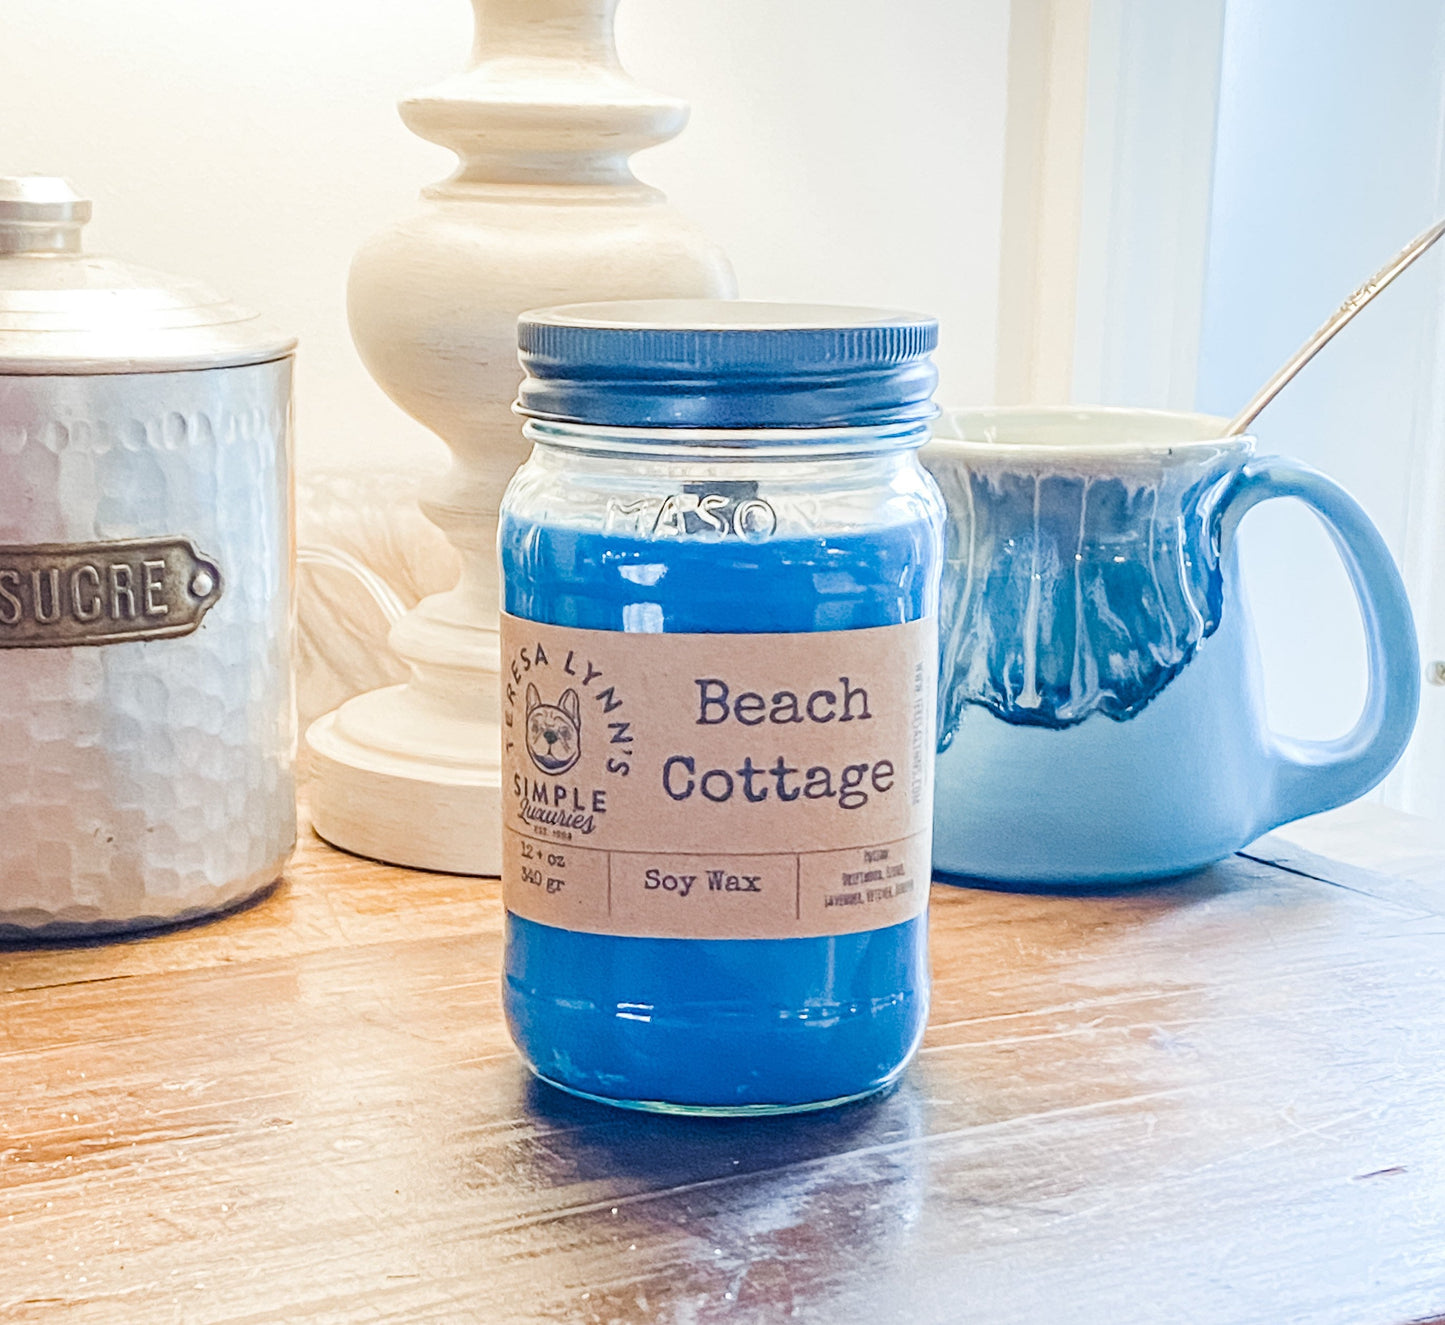 Beach Cottage soy wax, wooden wick candle